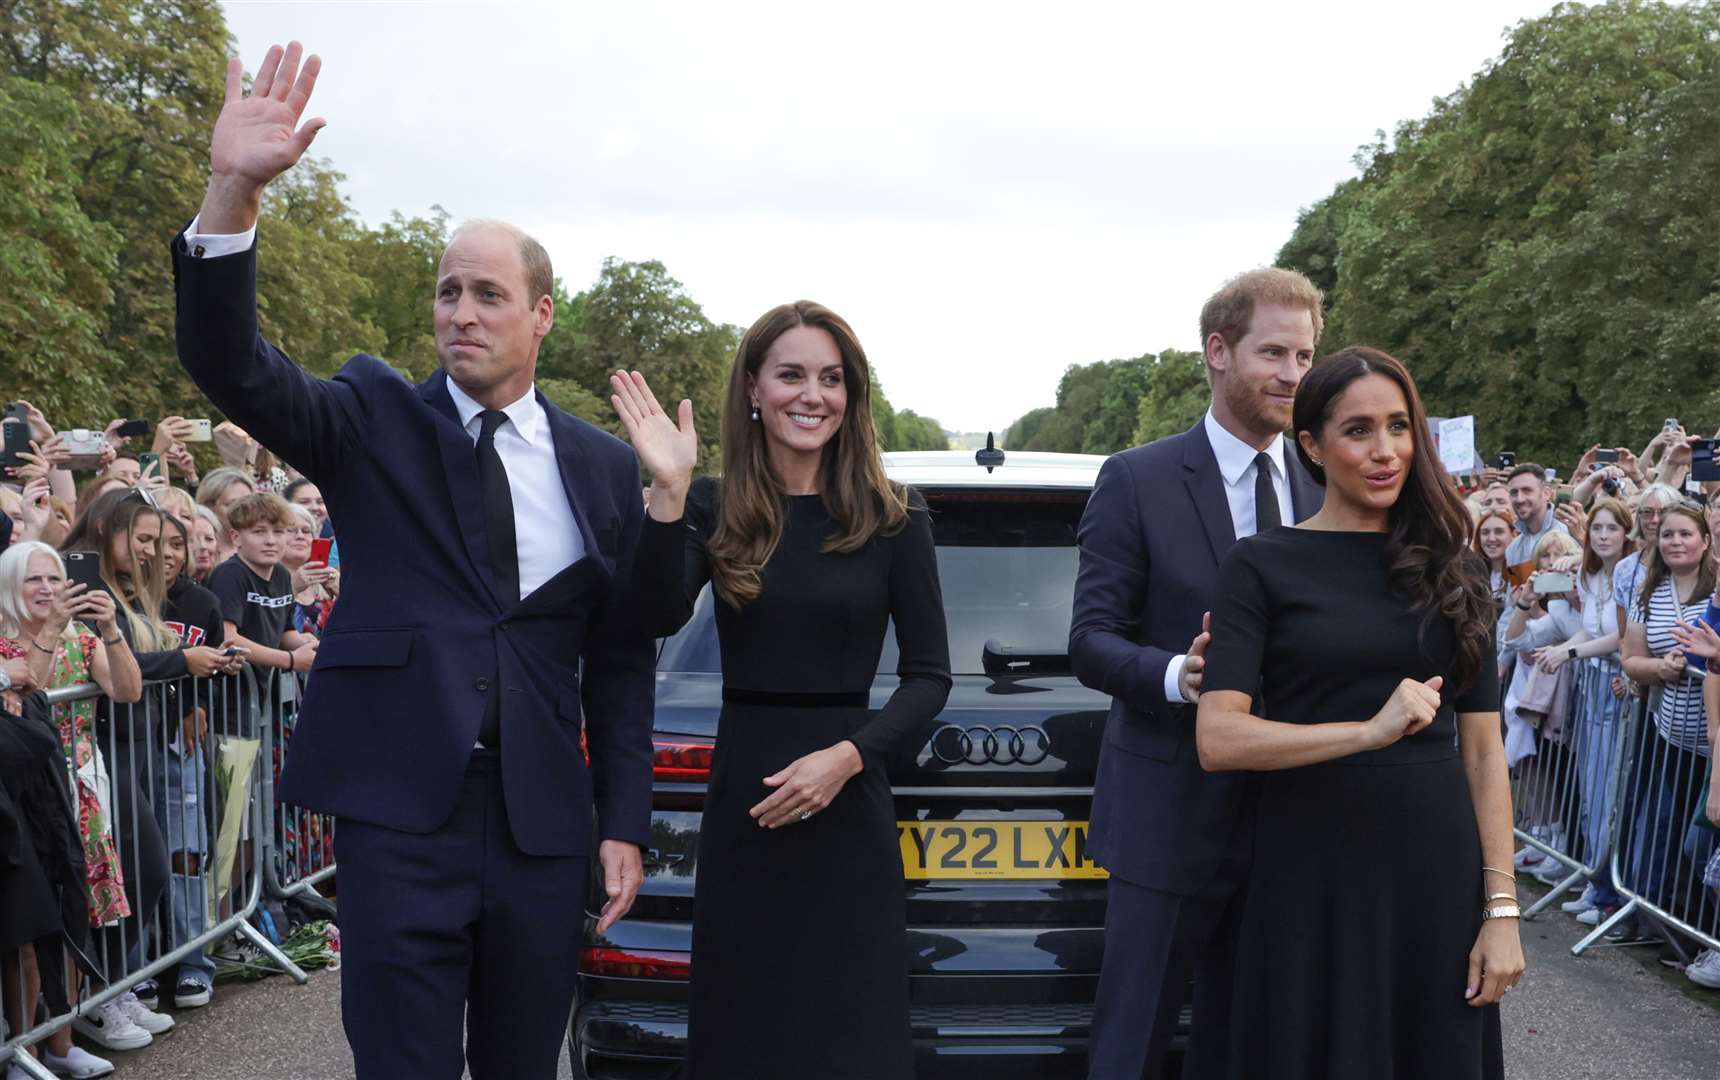 The Prince and Princess of Wales and the Duke and Duchess of Sussex waving to members of the public at Windsor Castle in Berkshire following the death of Queen Elizabeth II (Chris Jackson/PA)